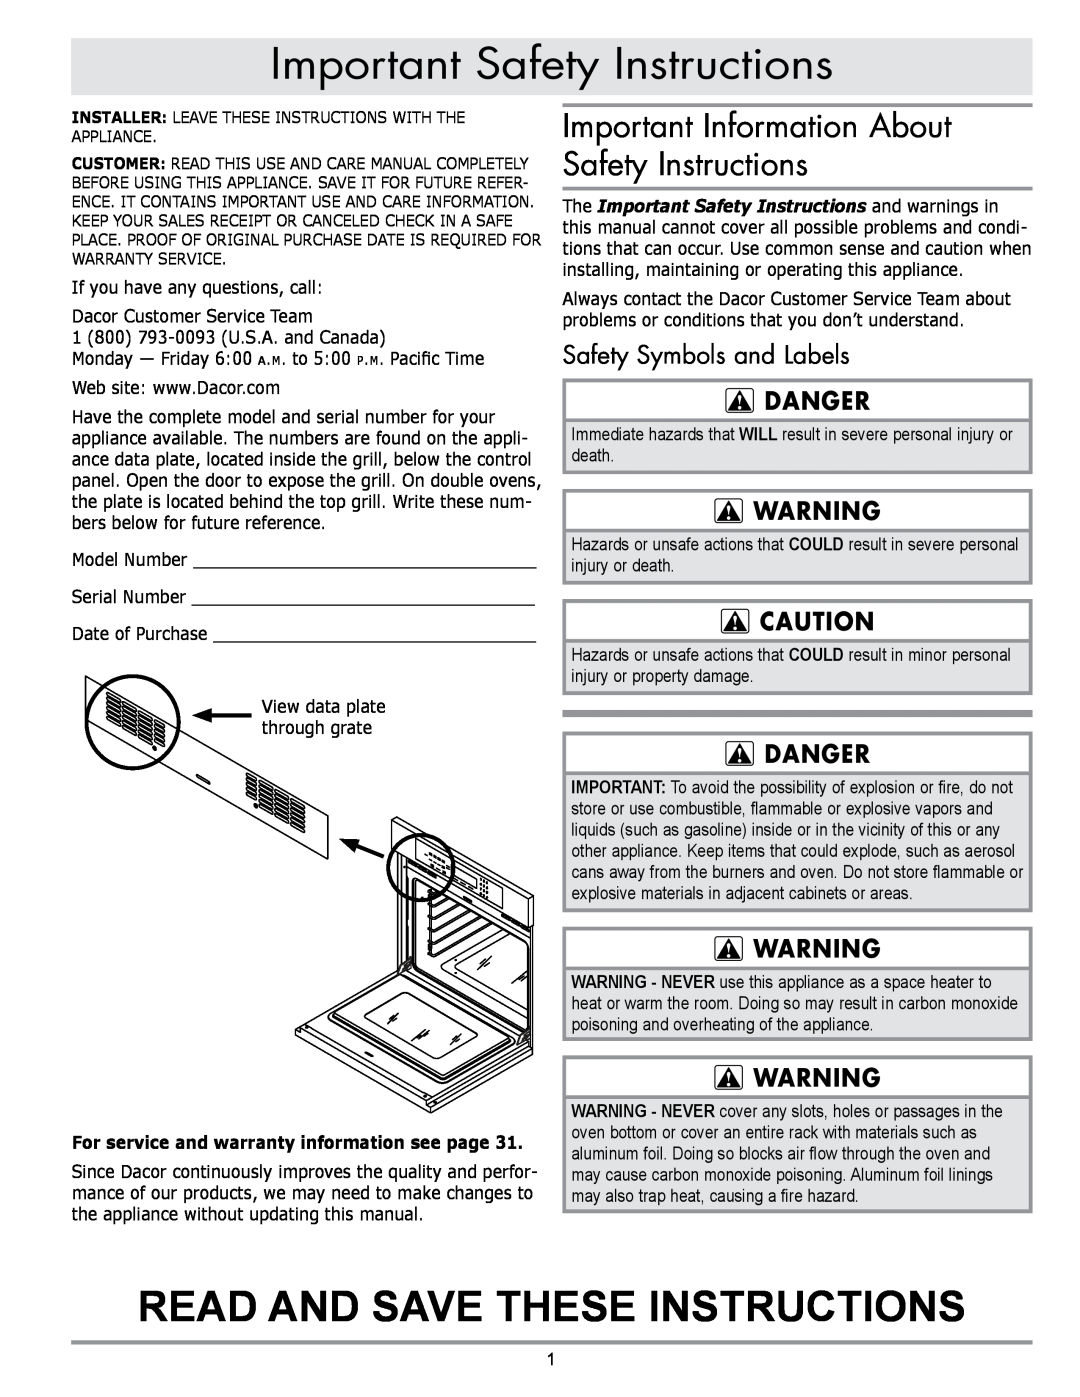 Dacor MORD230 Important Safety Instructions, Important Information About Safety Instructions, Safety Symbols and Labels 